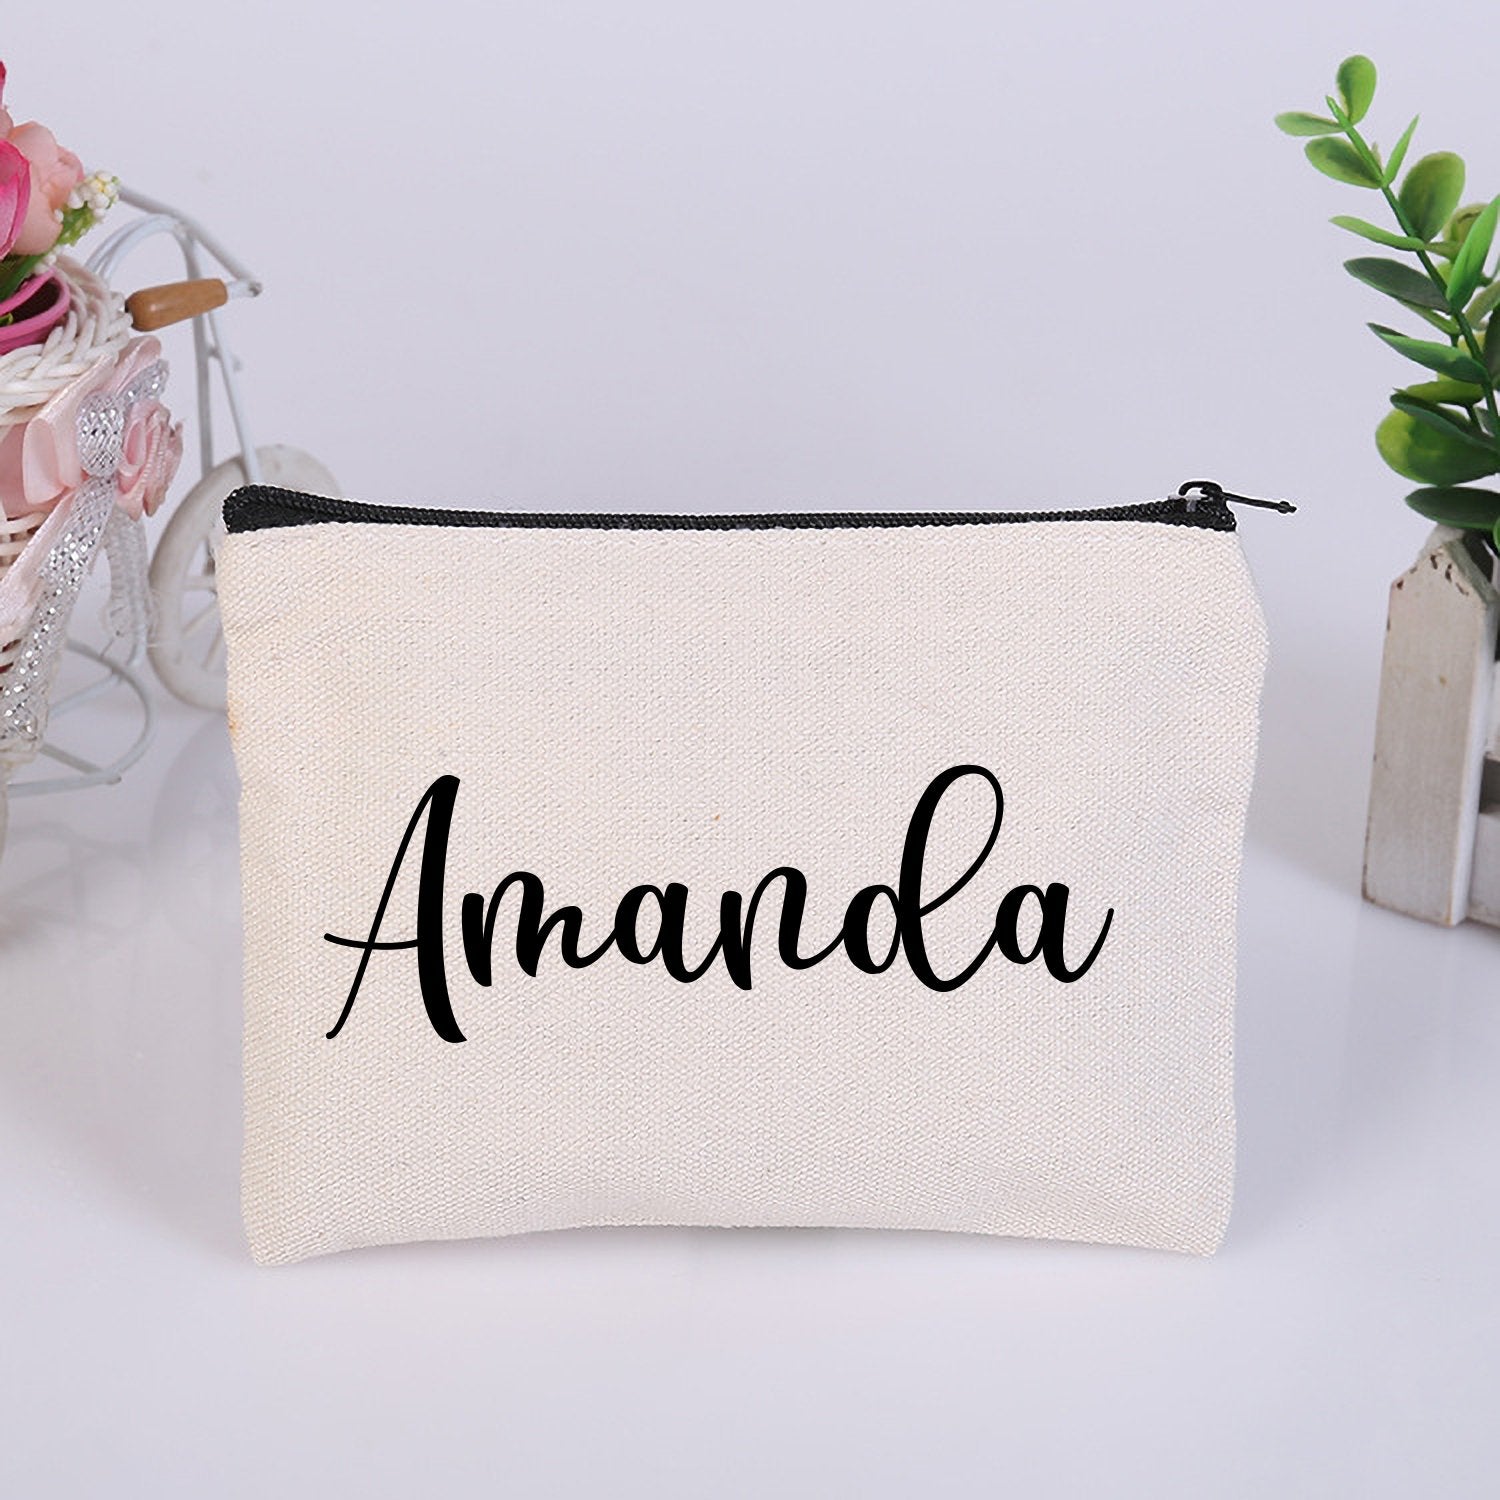  Monogrammed Clutch Bags For Women, Personalized Gift